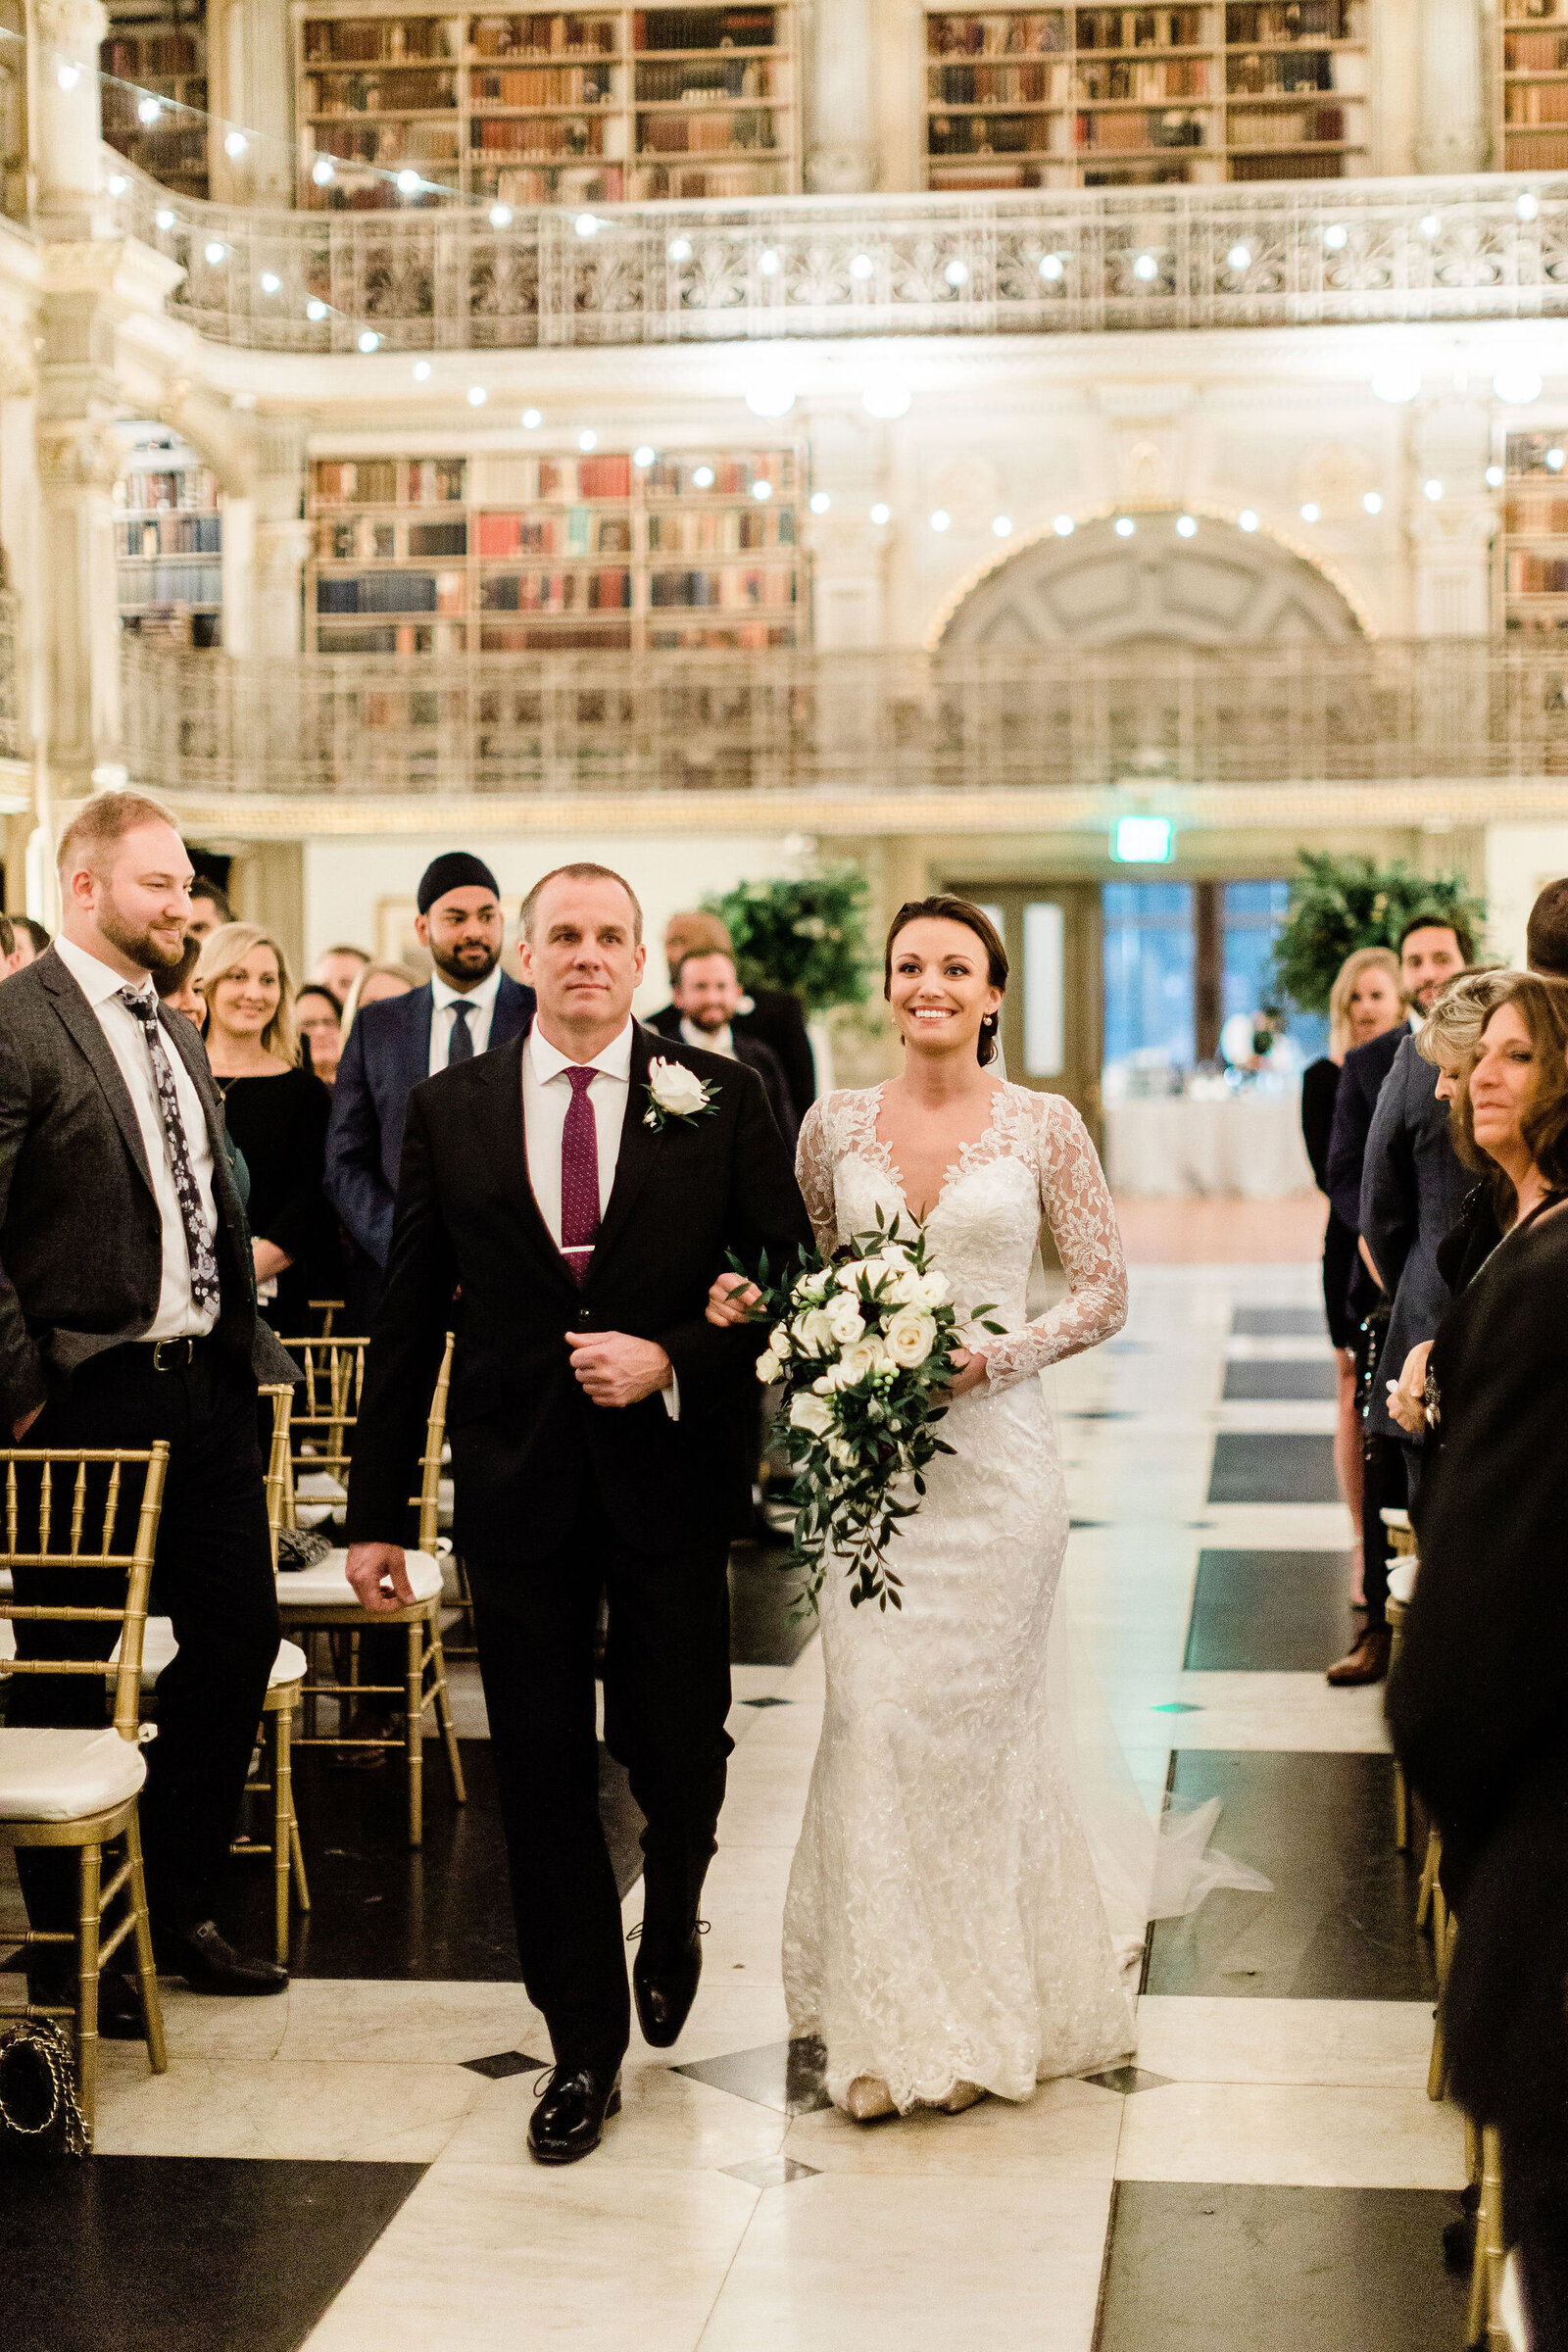 Bride Walking Down the Isle | The Peabody Library Baltimore MD | The Axtells Photo and Film